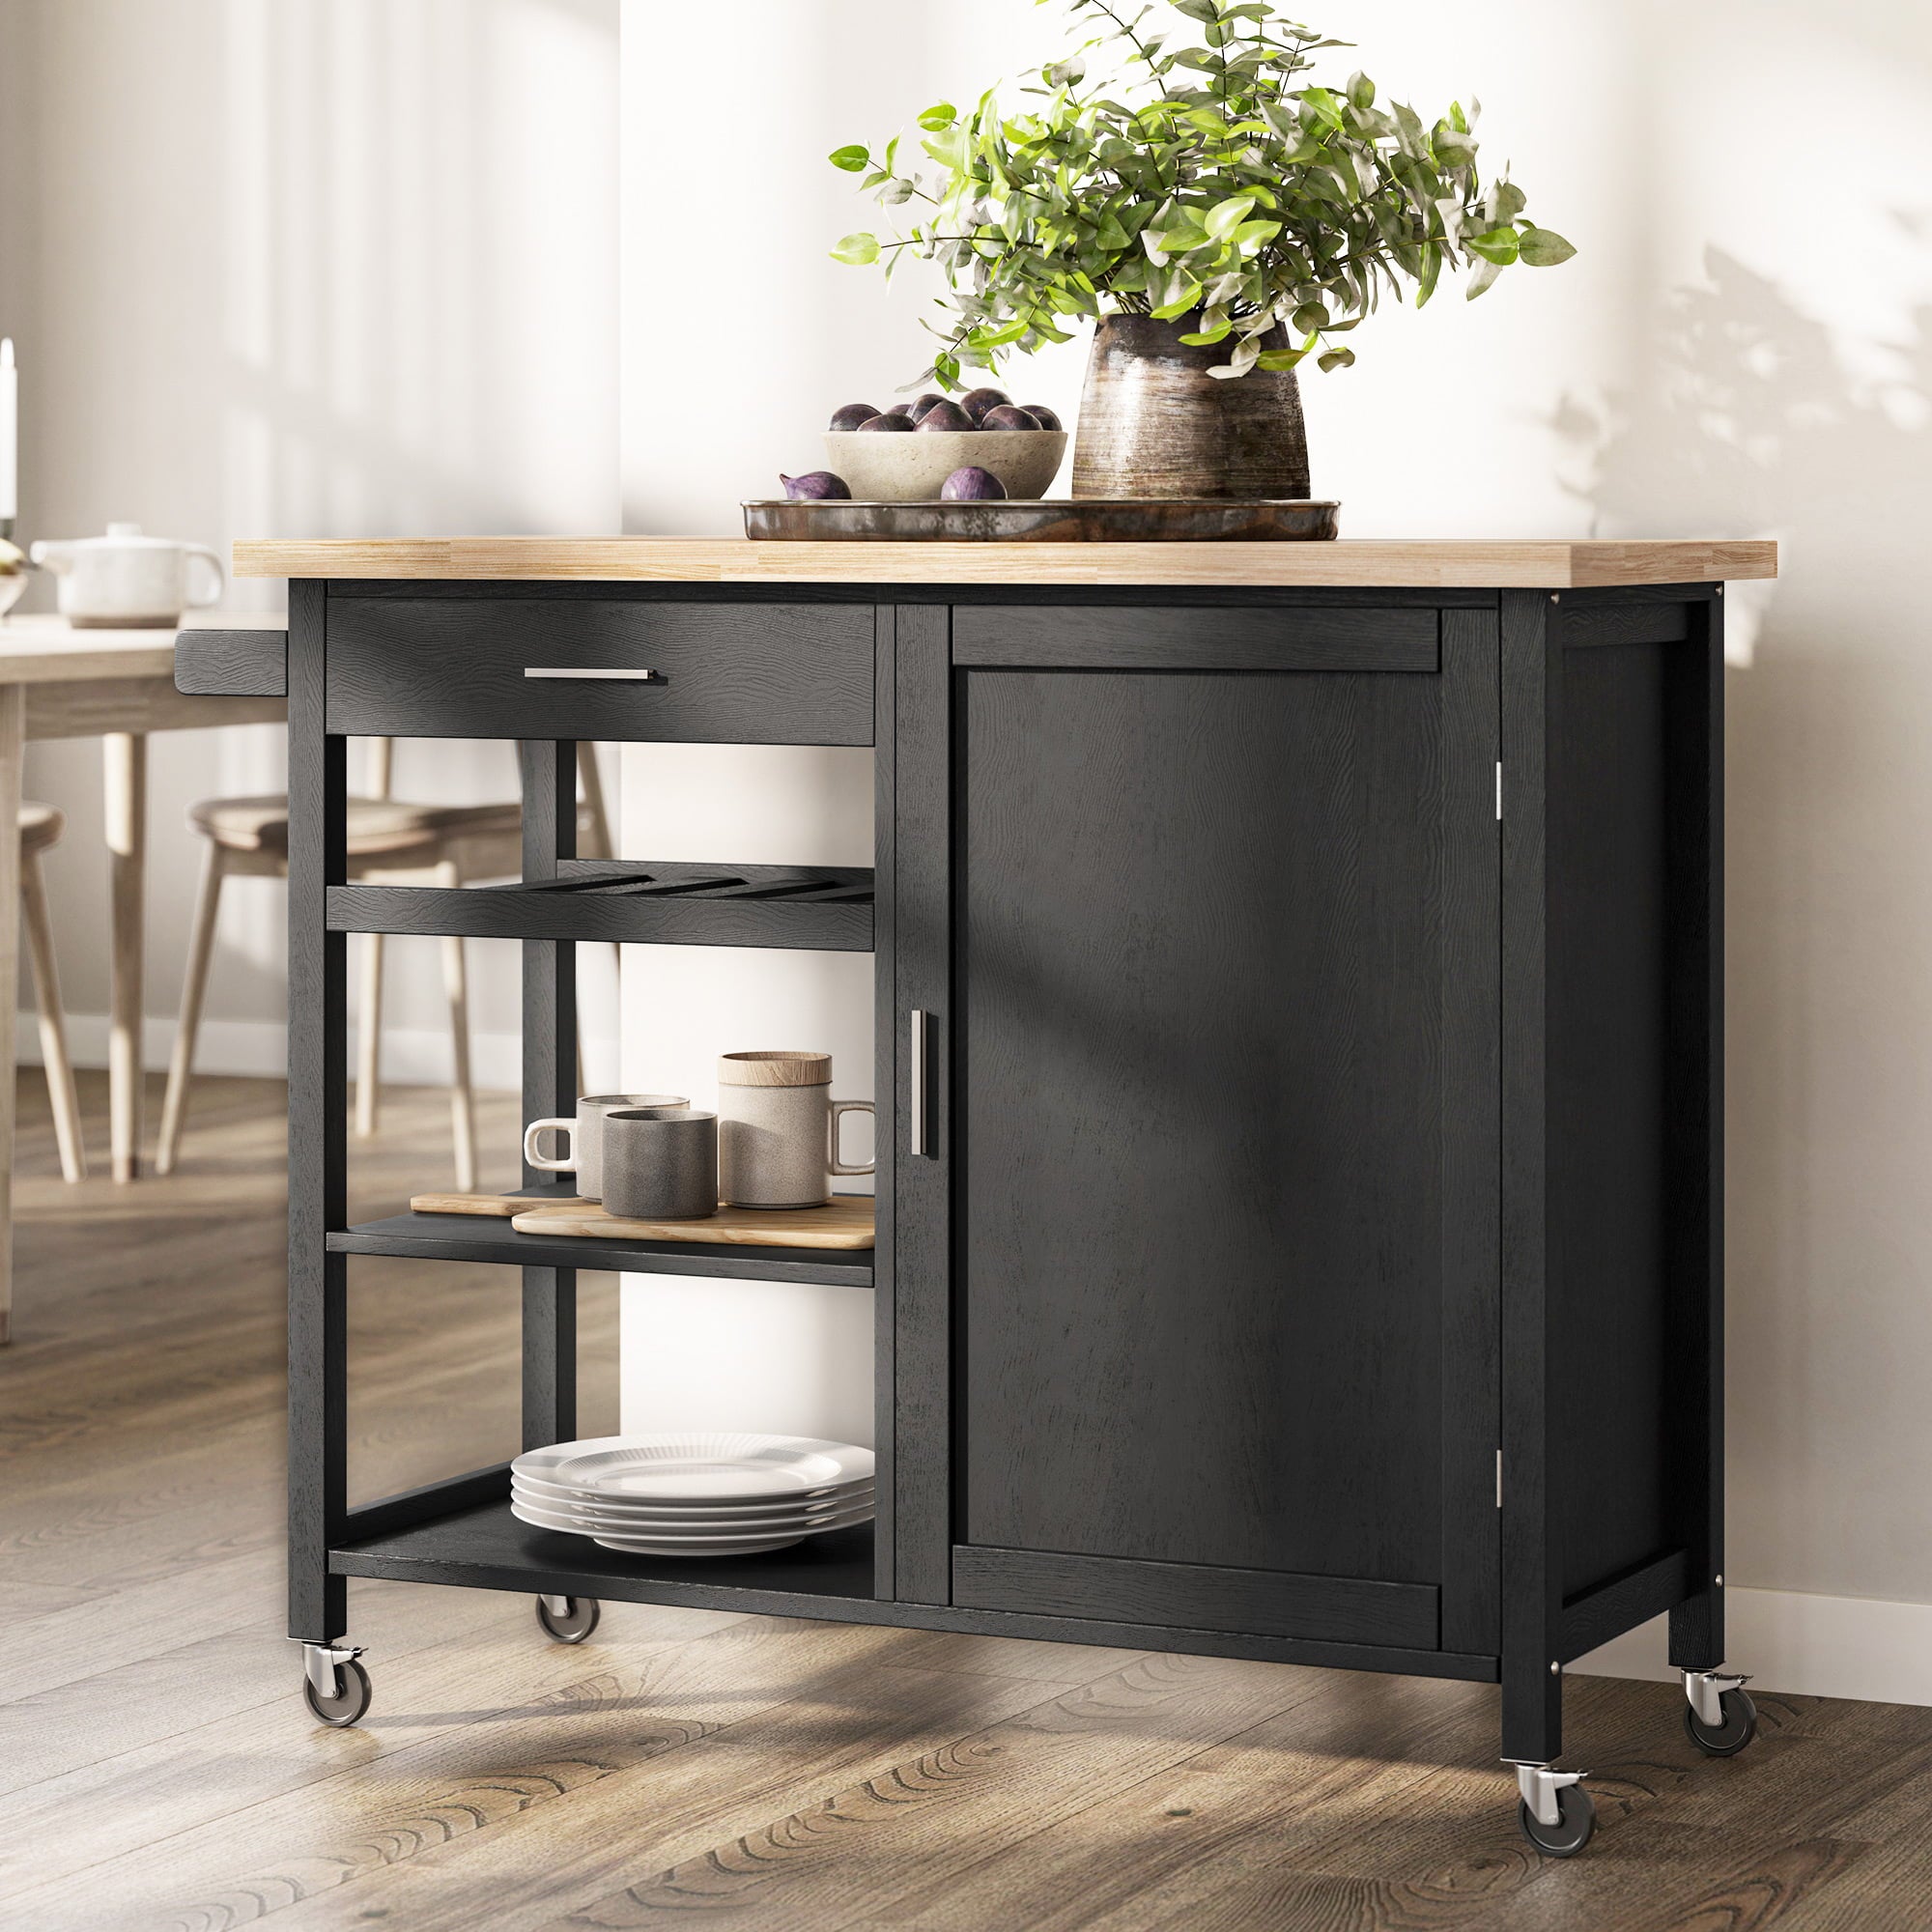 BELLEZE Rolling Kitchen Island Utility Cart with a Drawer - Sonoma (Black)